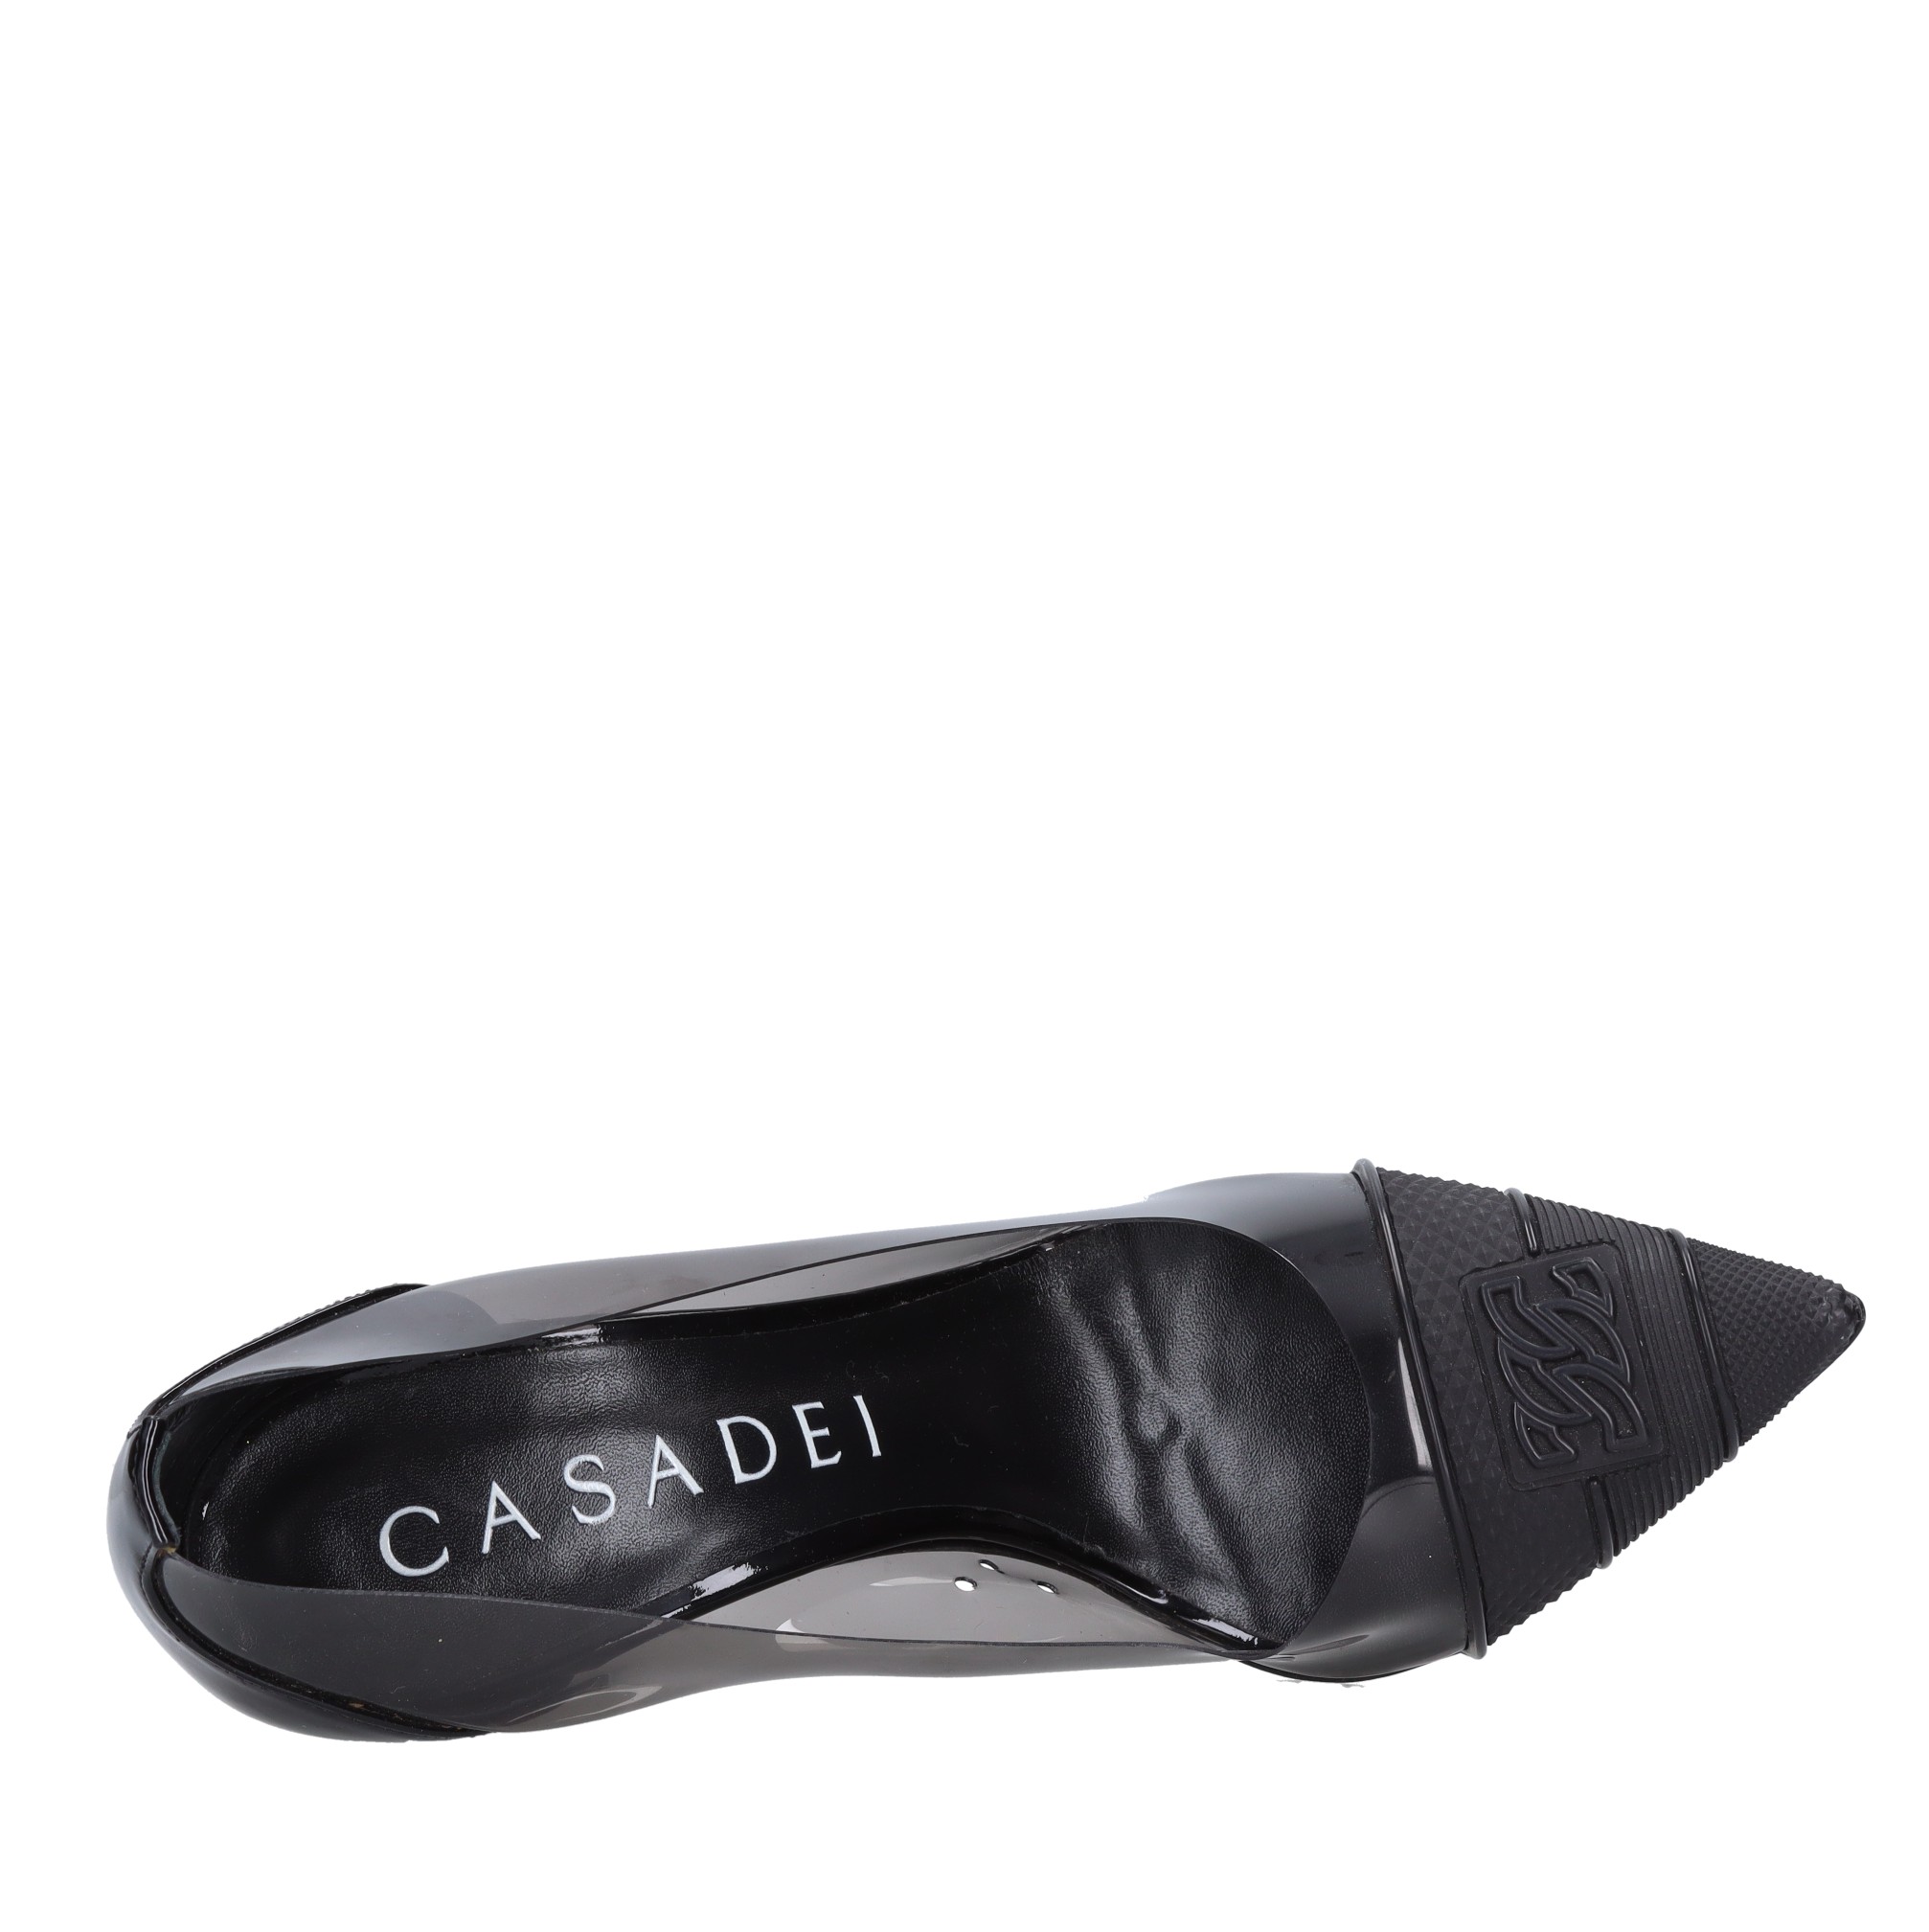 Leather and plexy Blade pumps - CASADEI - Ginevra calzature